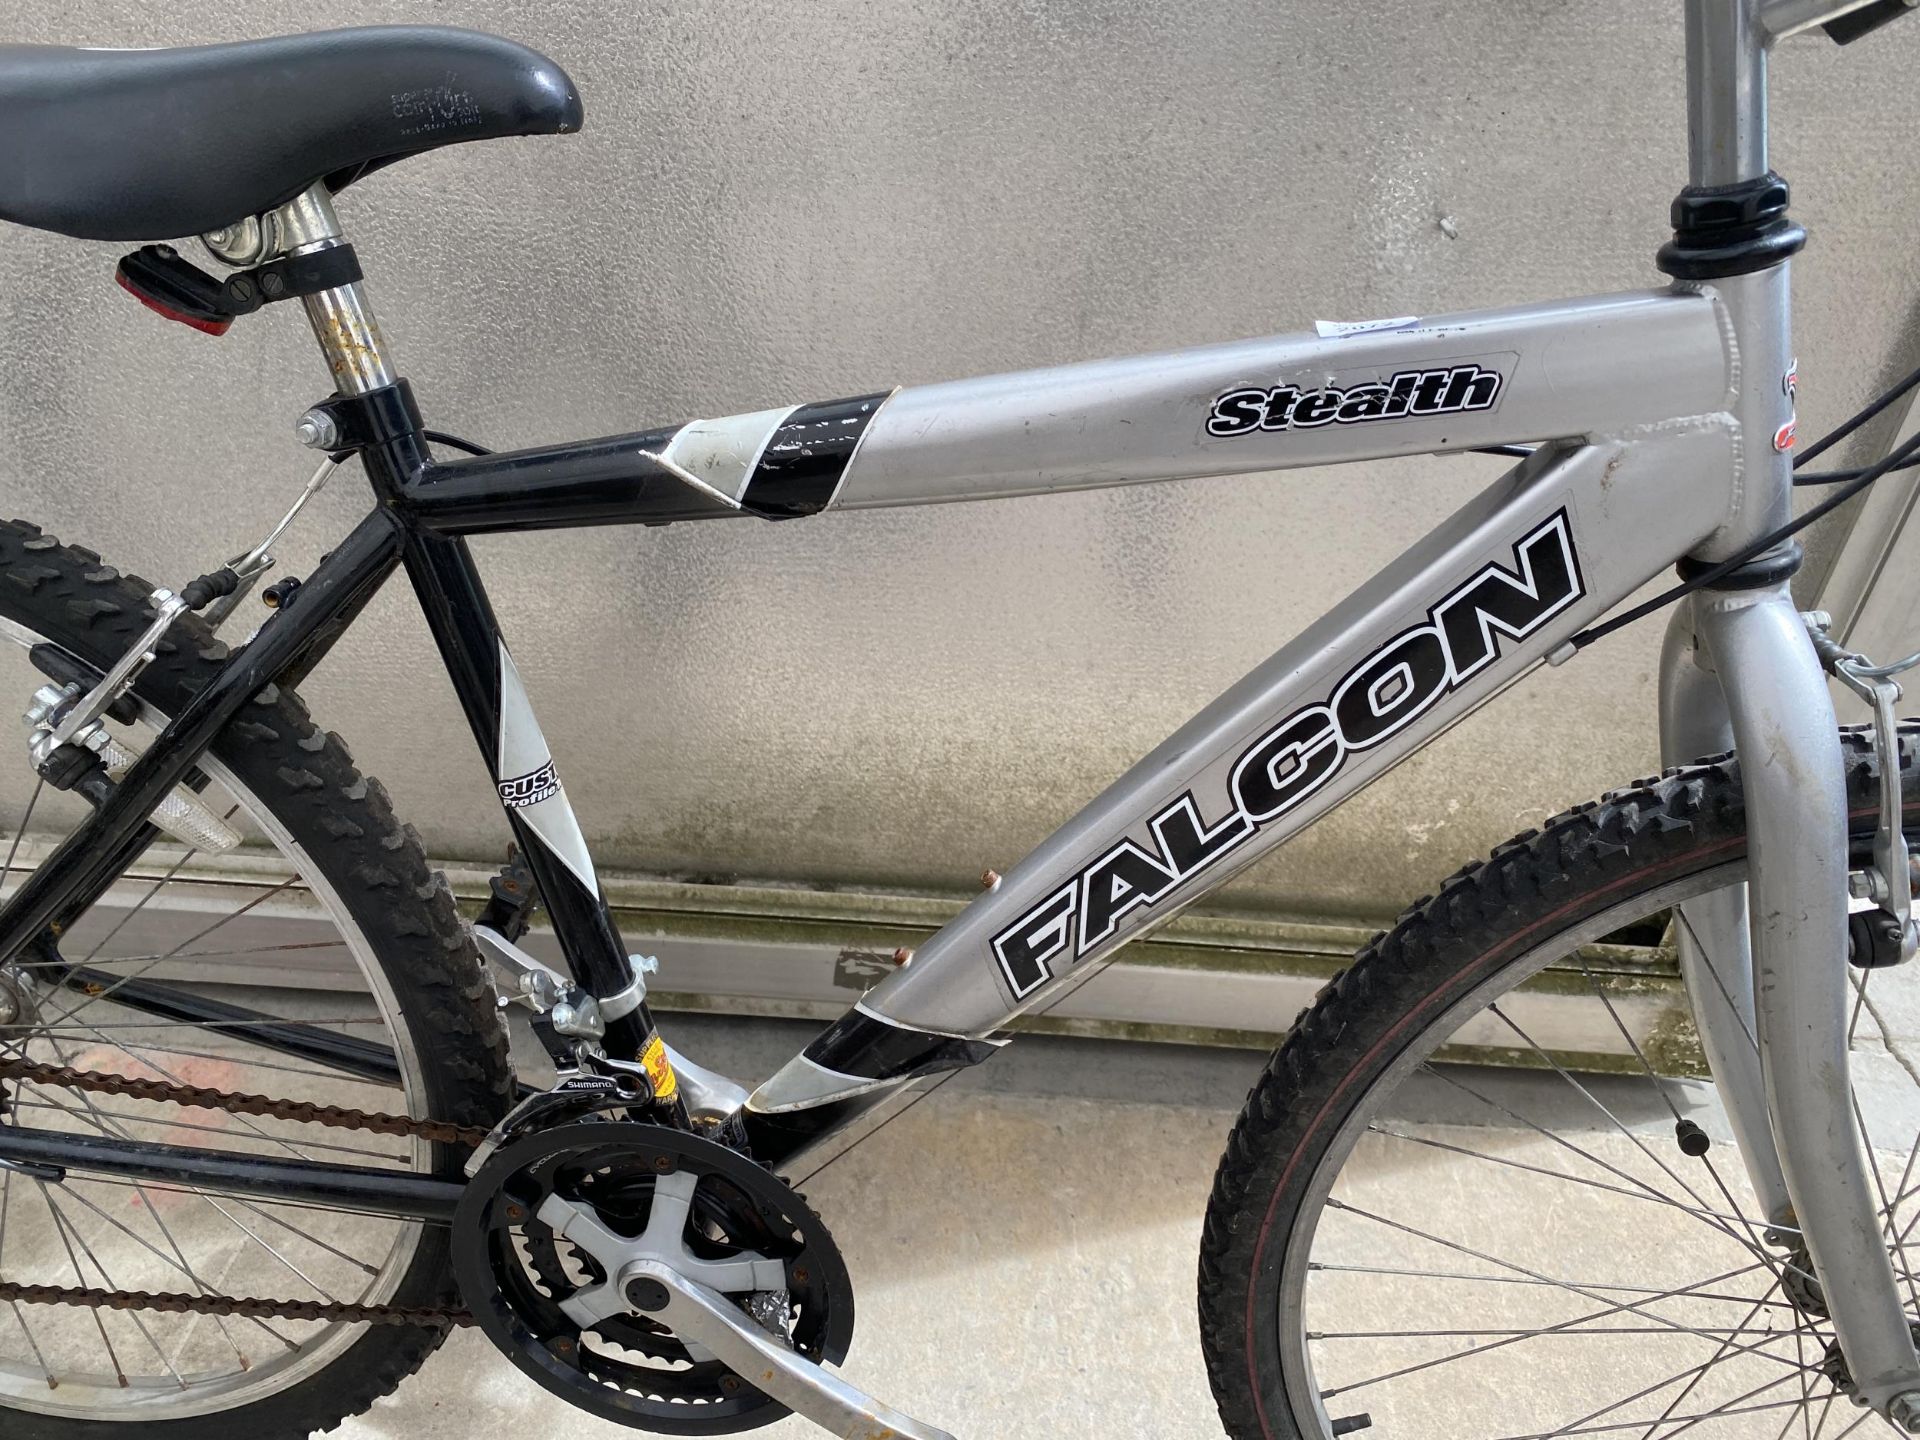 A GENTS FALCON MOUNTAIN BIKE WITH AN 18 GEAR SHIMANO SYSTEM - Image 2 of 3